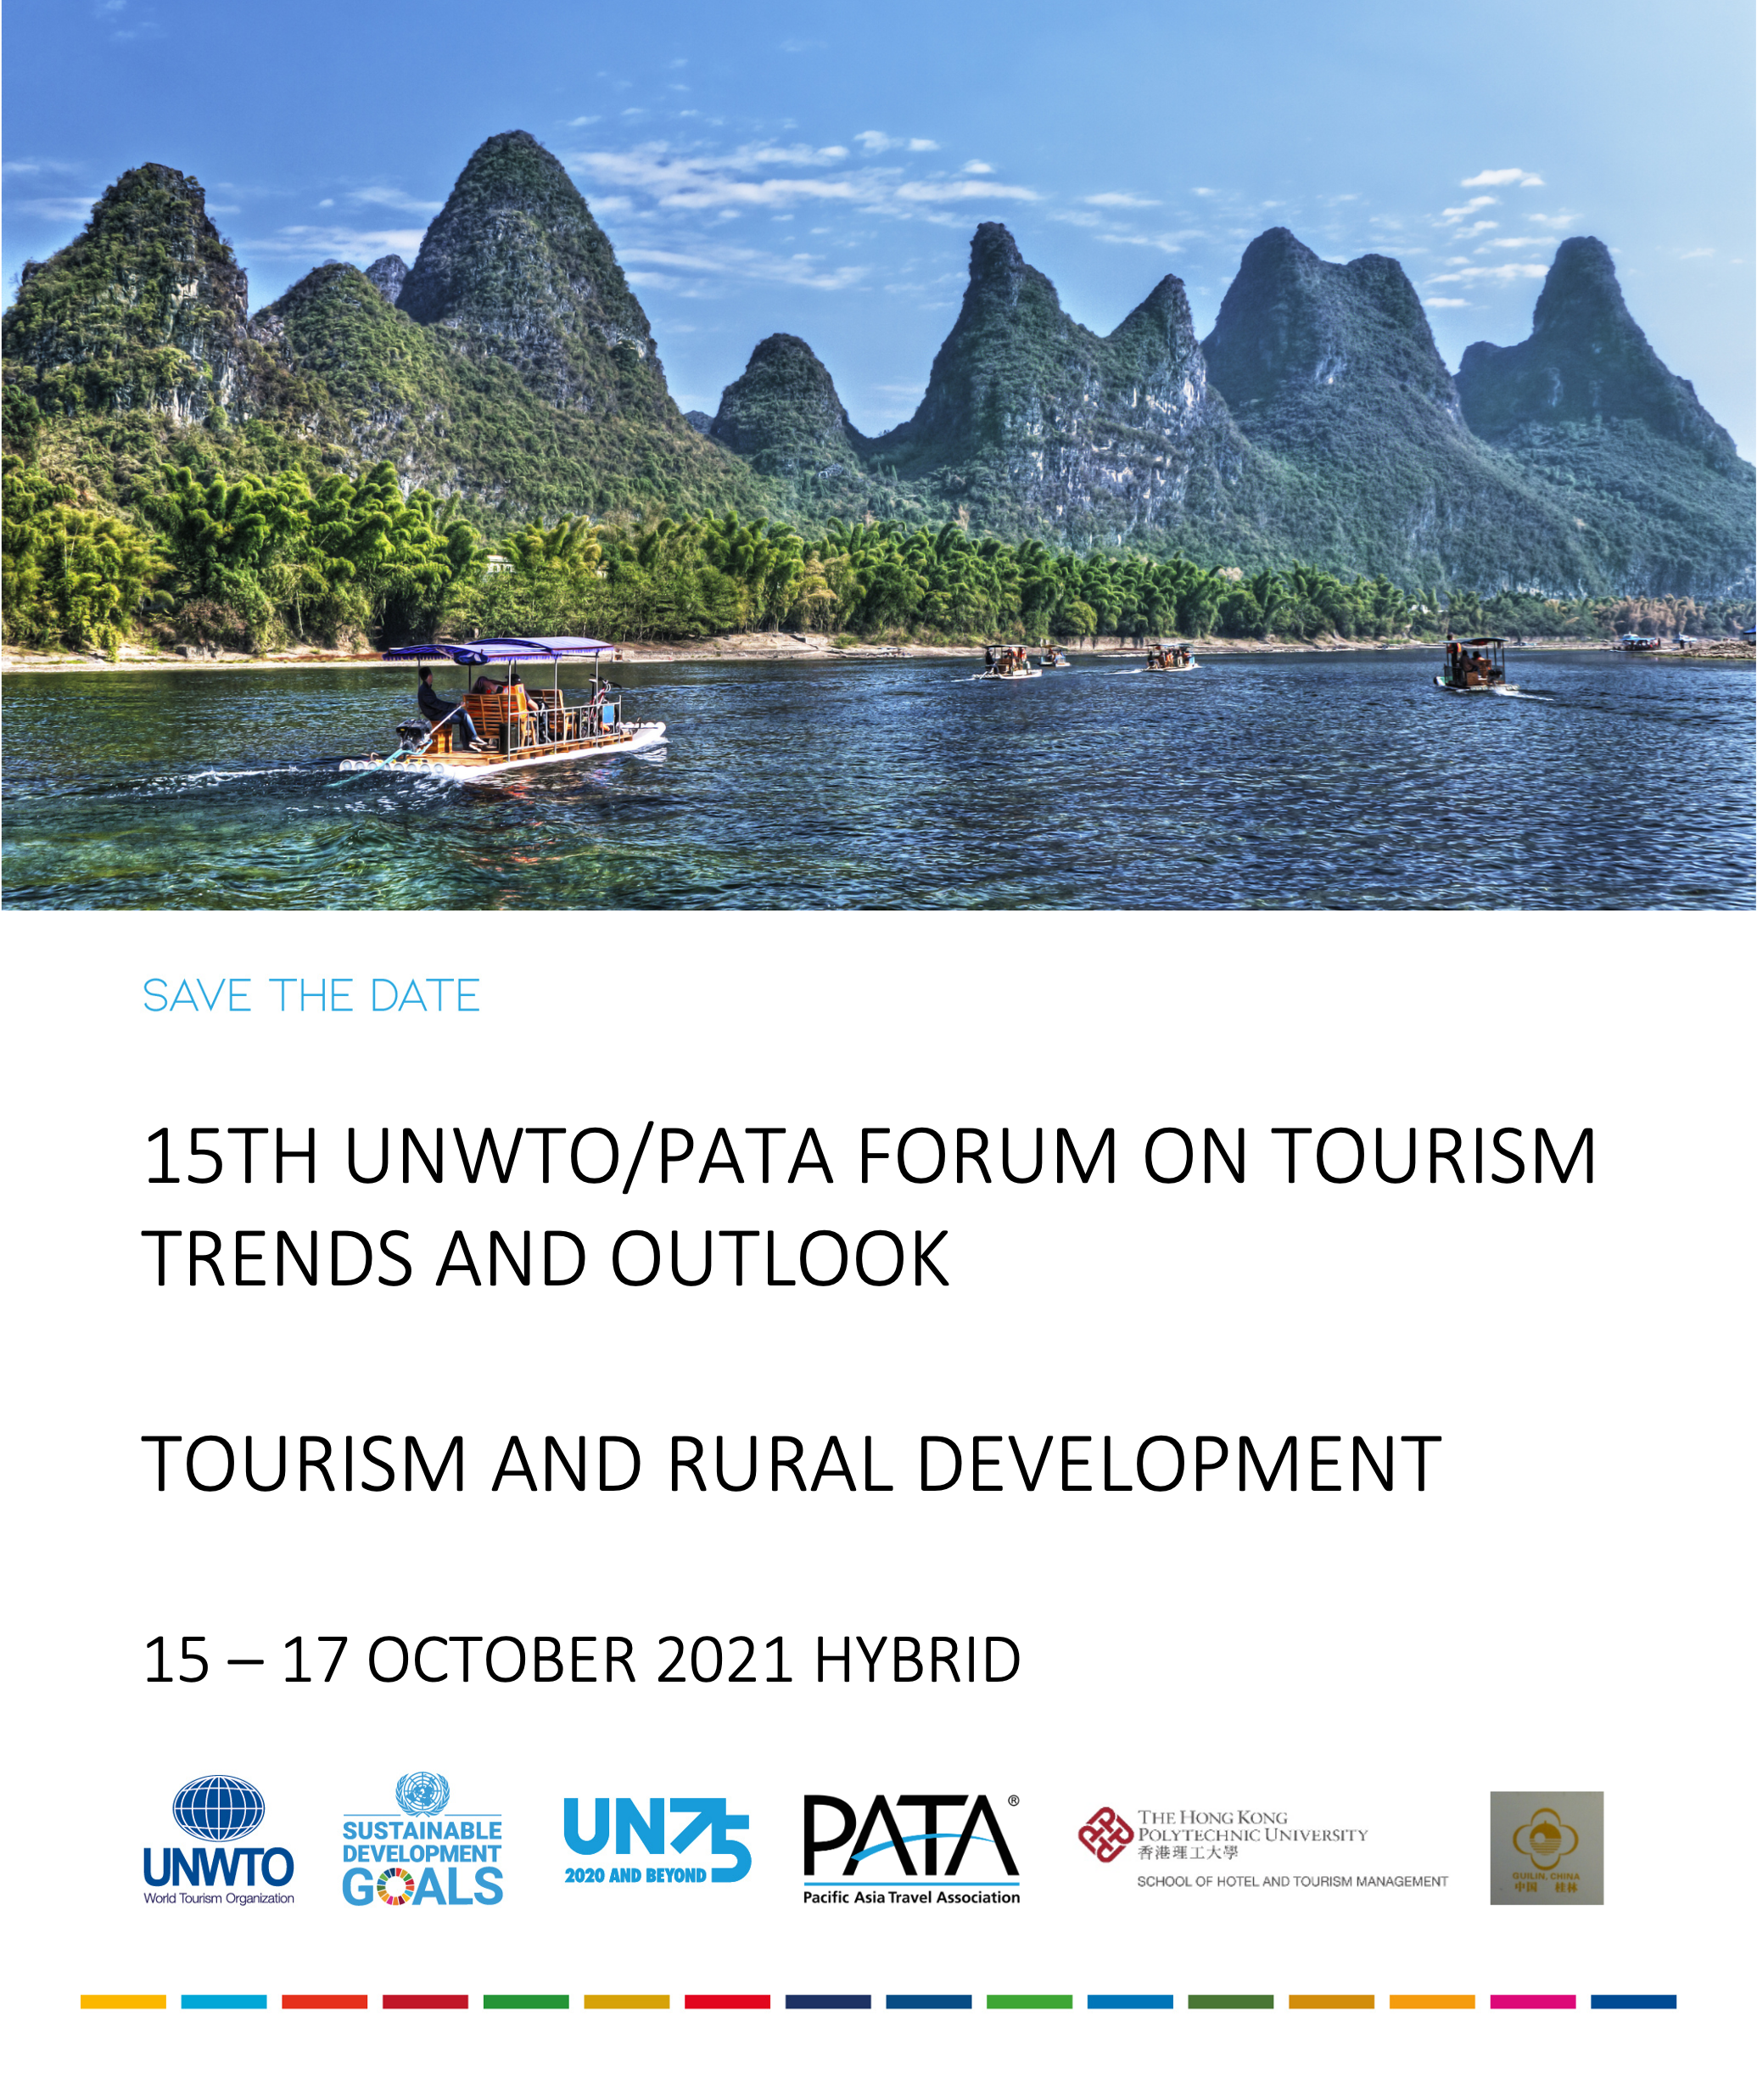 15th UNWTO/PATA Forum on Tourism Trends and Outlook